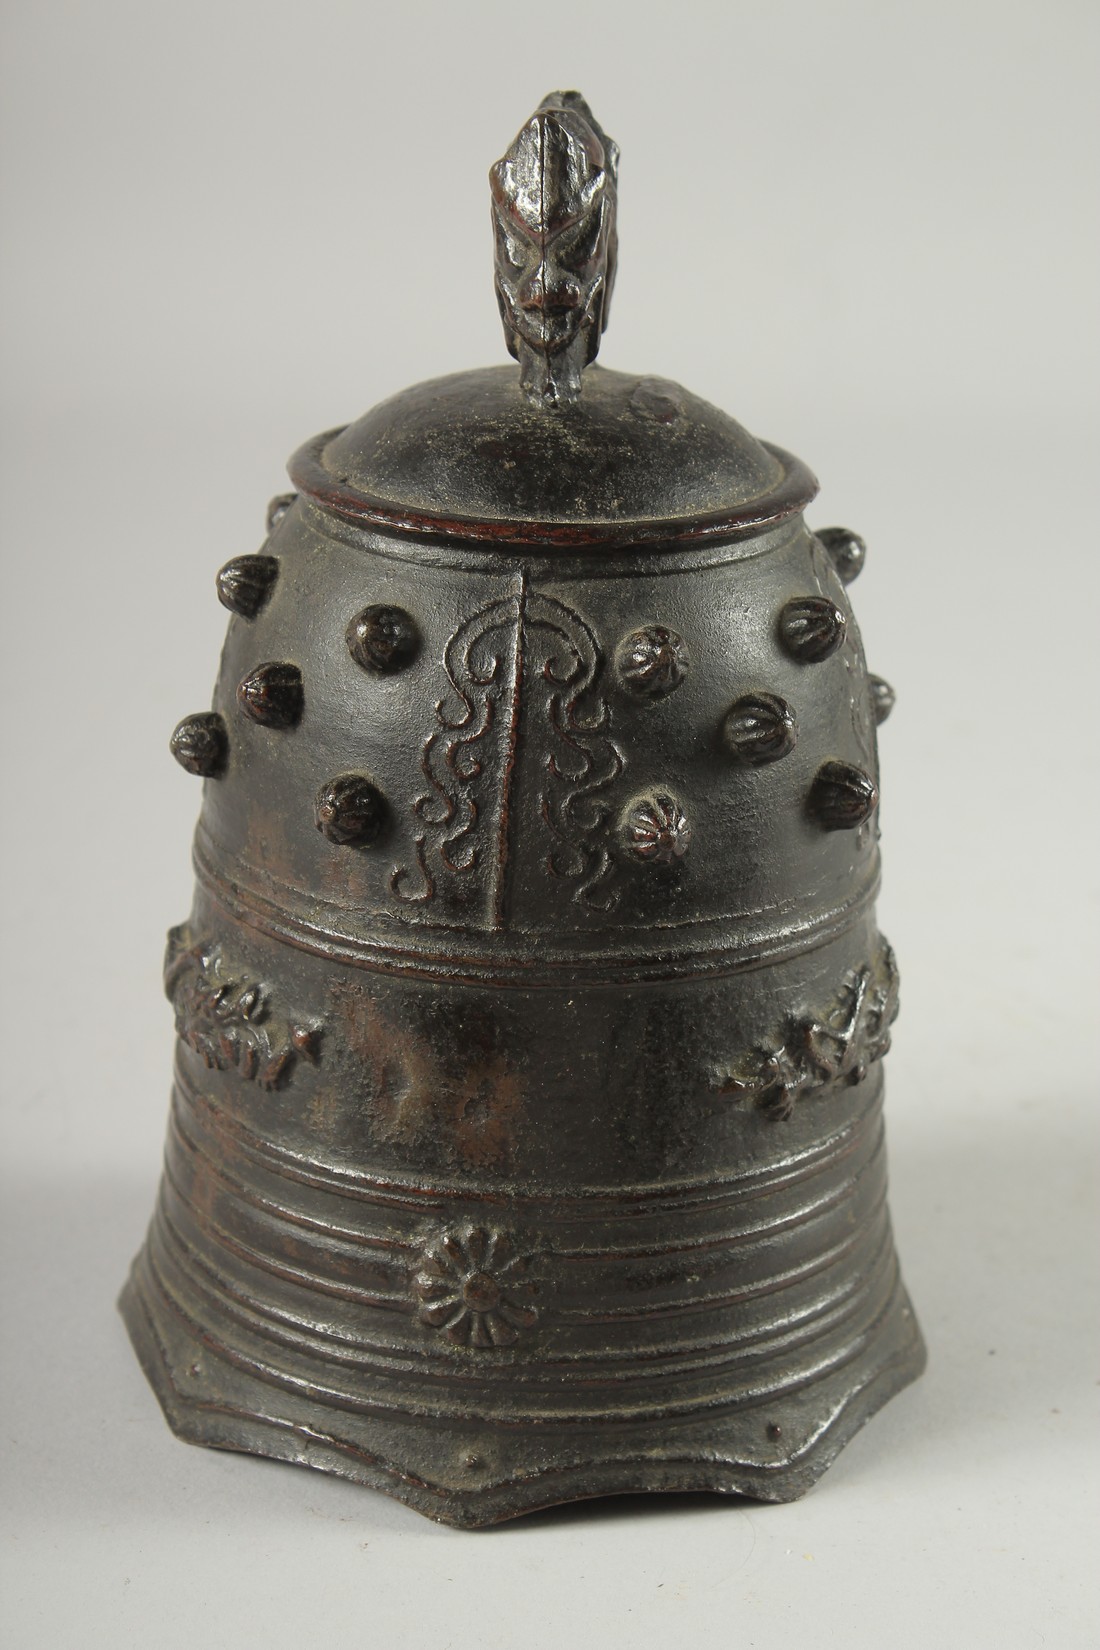 A CHINESE BRONZE PRAYER BELL, 19cm high. - Image 2 of 5